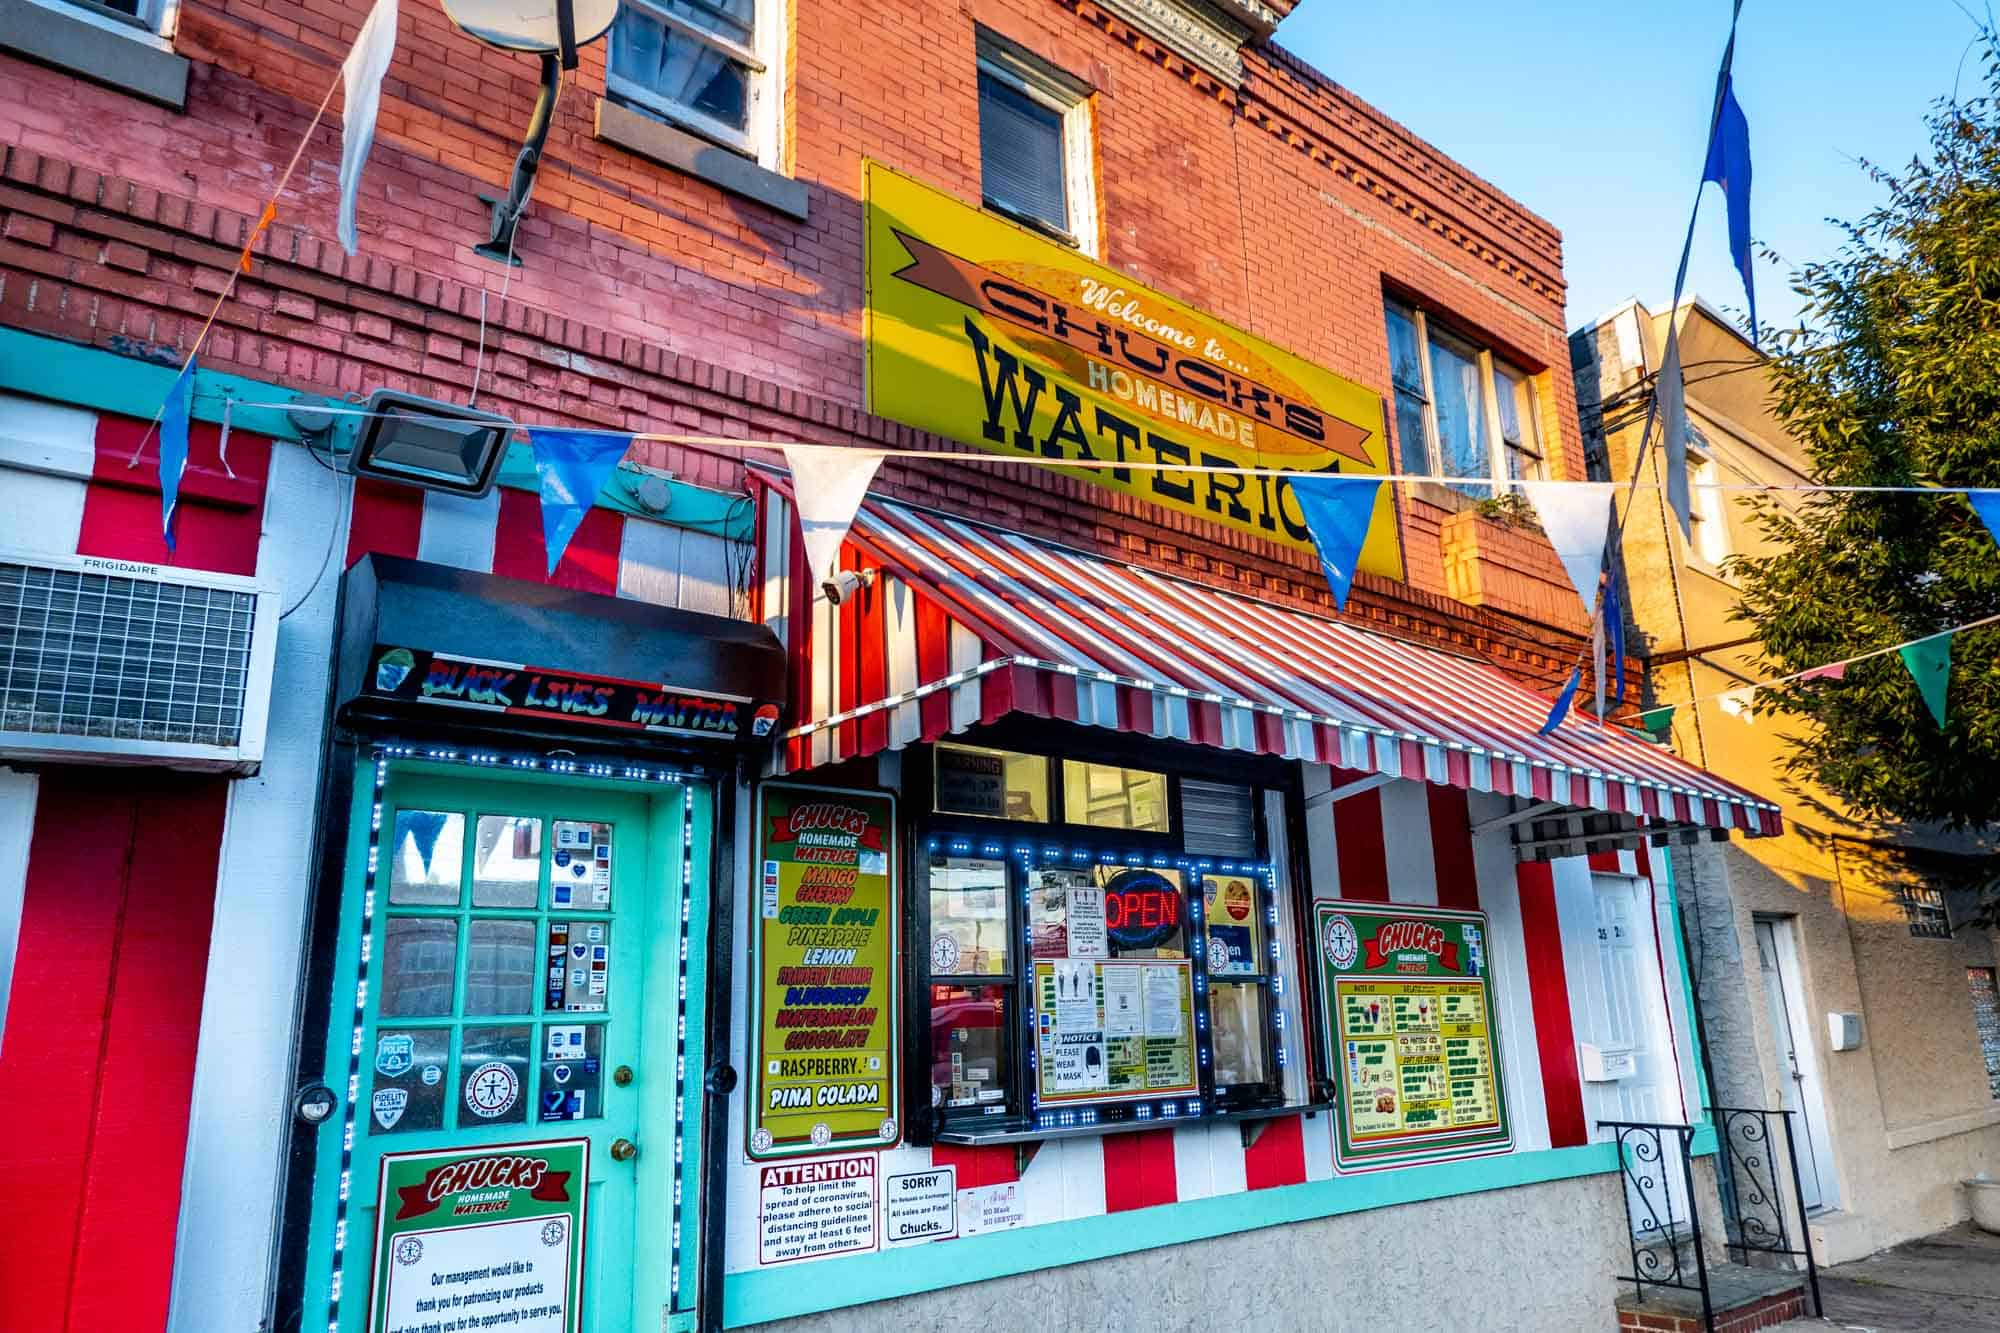 Storefront with a red and white striped awning and a sign: "Welcome to Chuck's Homemade Water Ice"